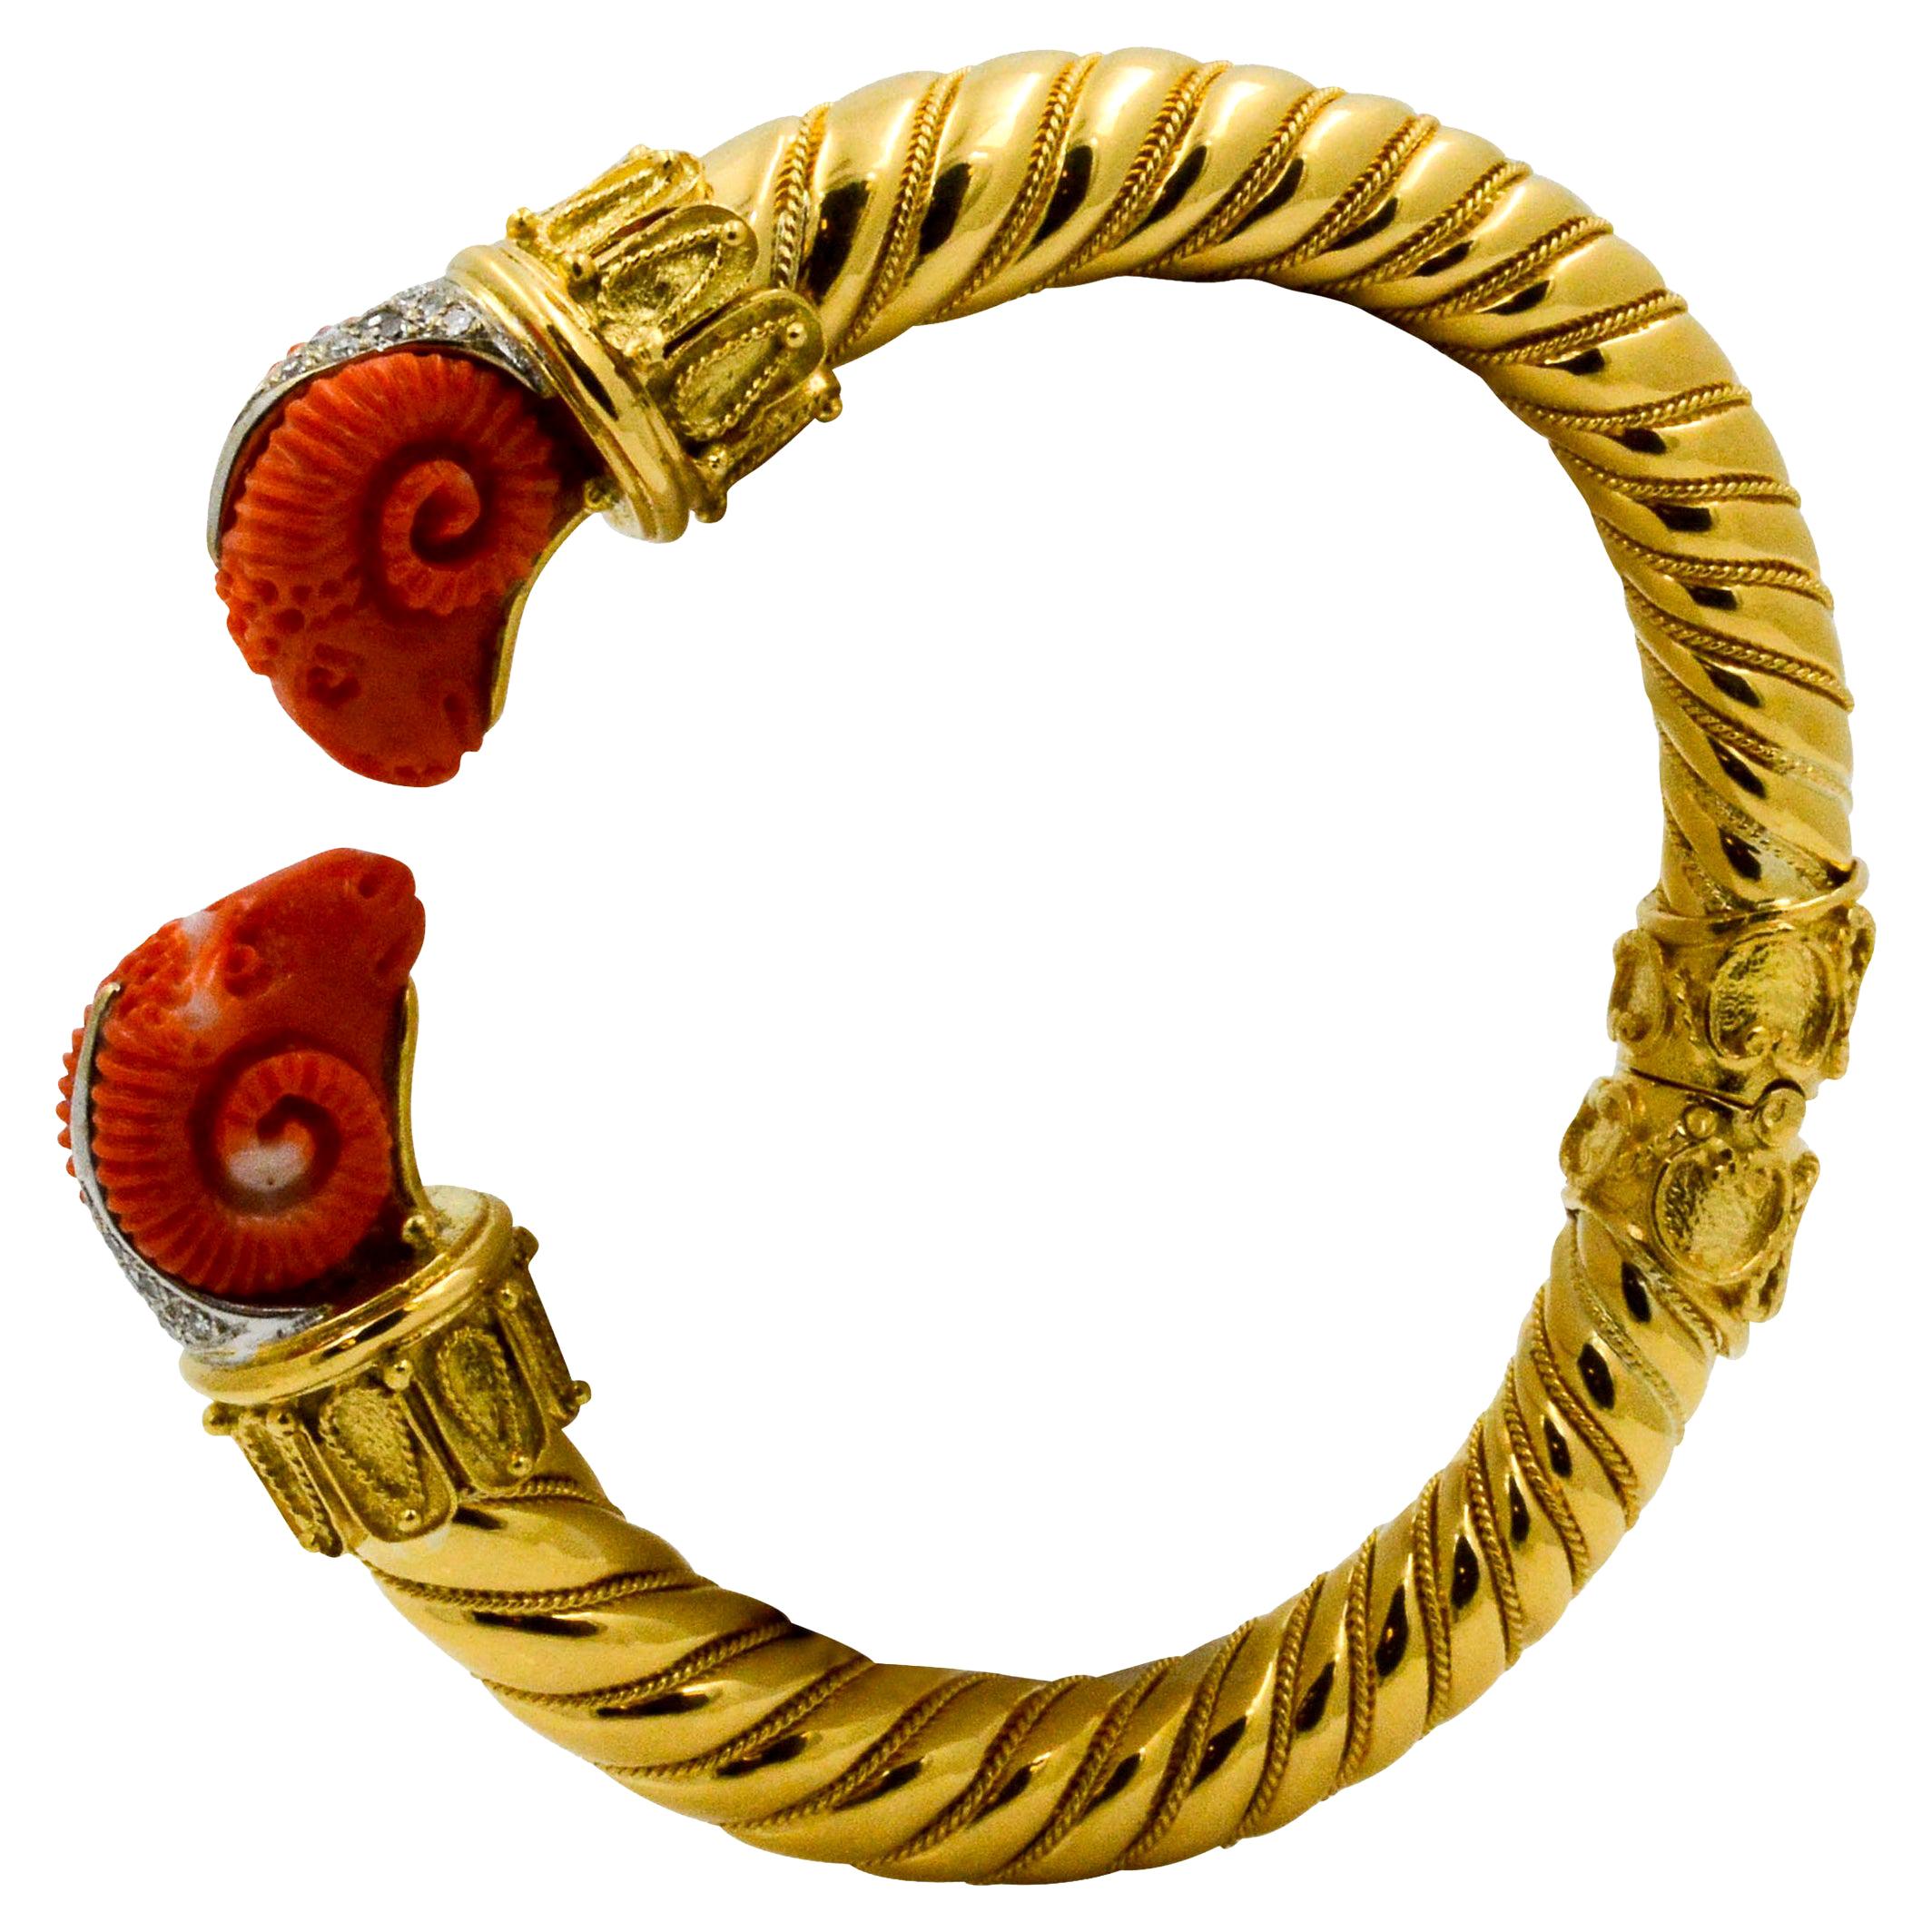 This Etruscan 18 karat yellow gold bangle has two carved coral rams accented with 20 single cut diamonds with a combined total weight of 0.40 carats. The bangle has a hinged bottom.